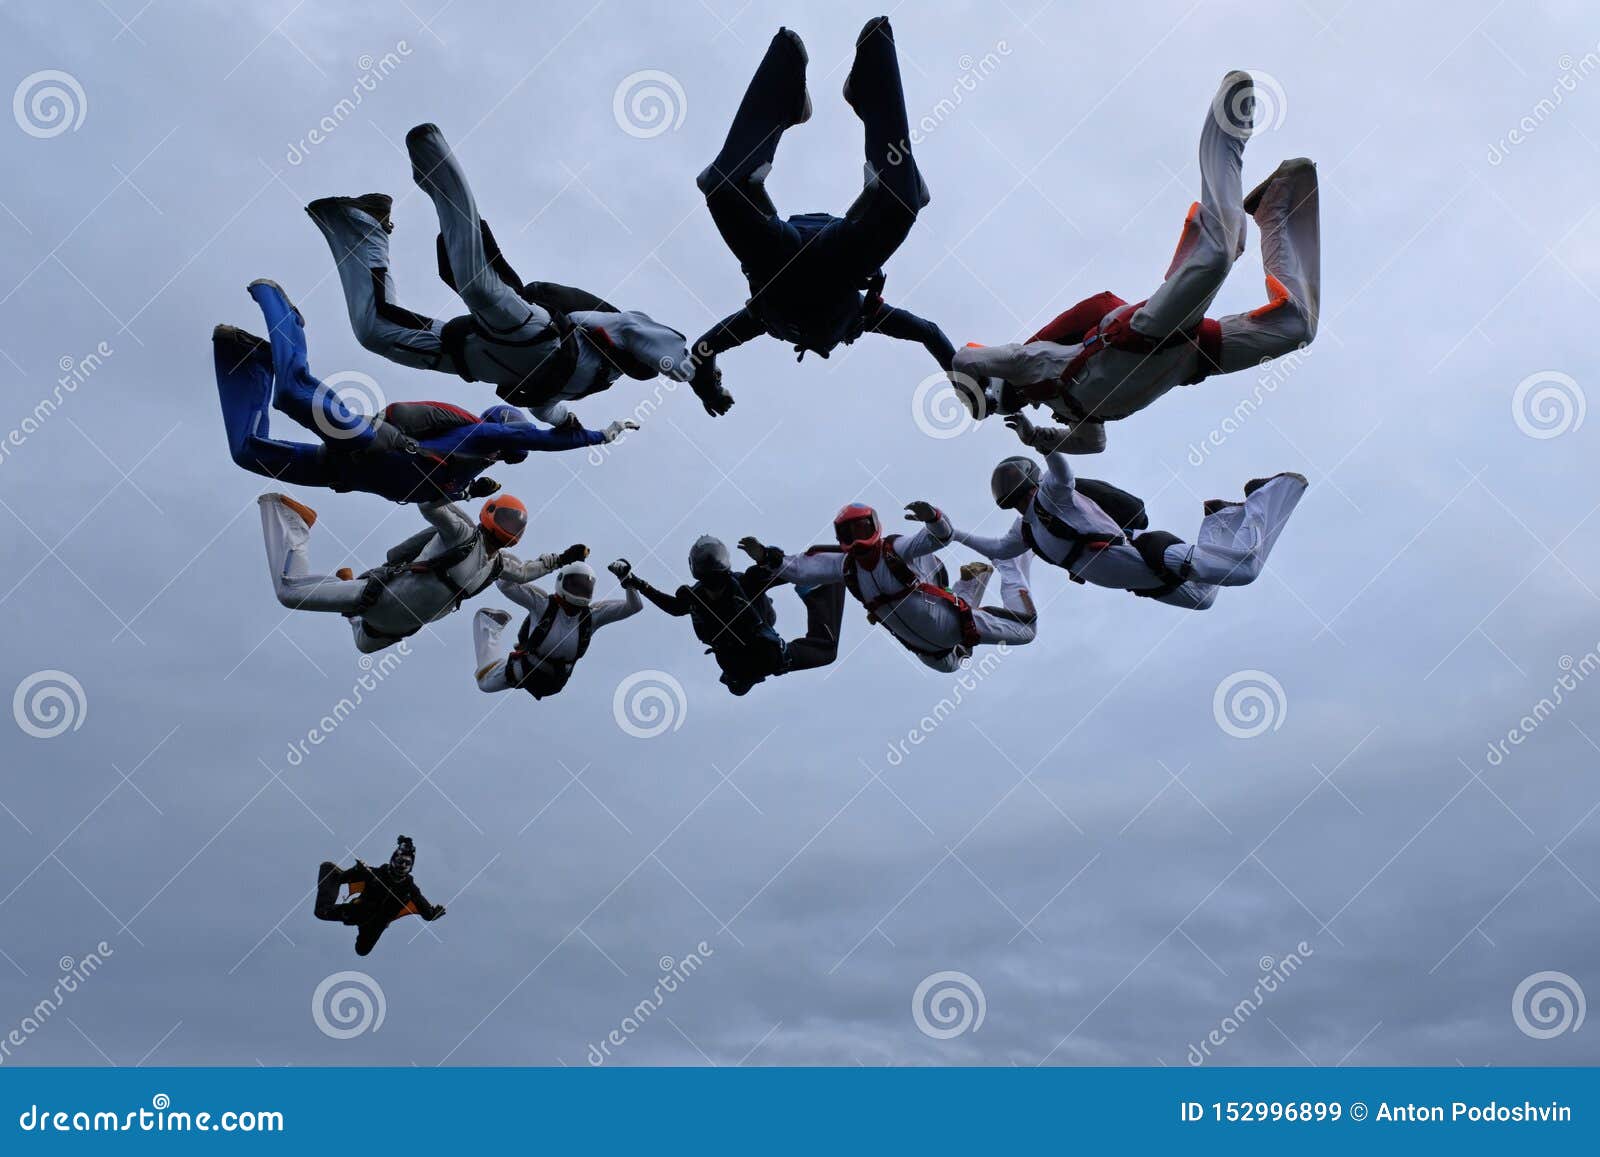 A Group of Skydivers. Formation Skydiving in the Sky. Stock Image ...